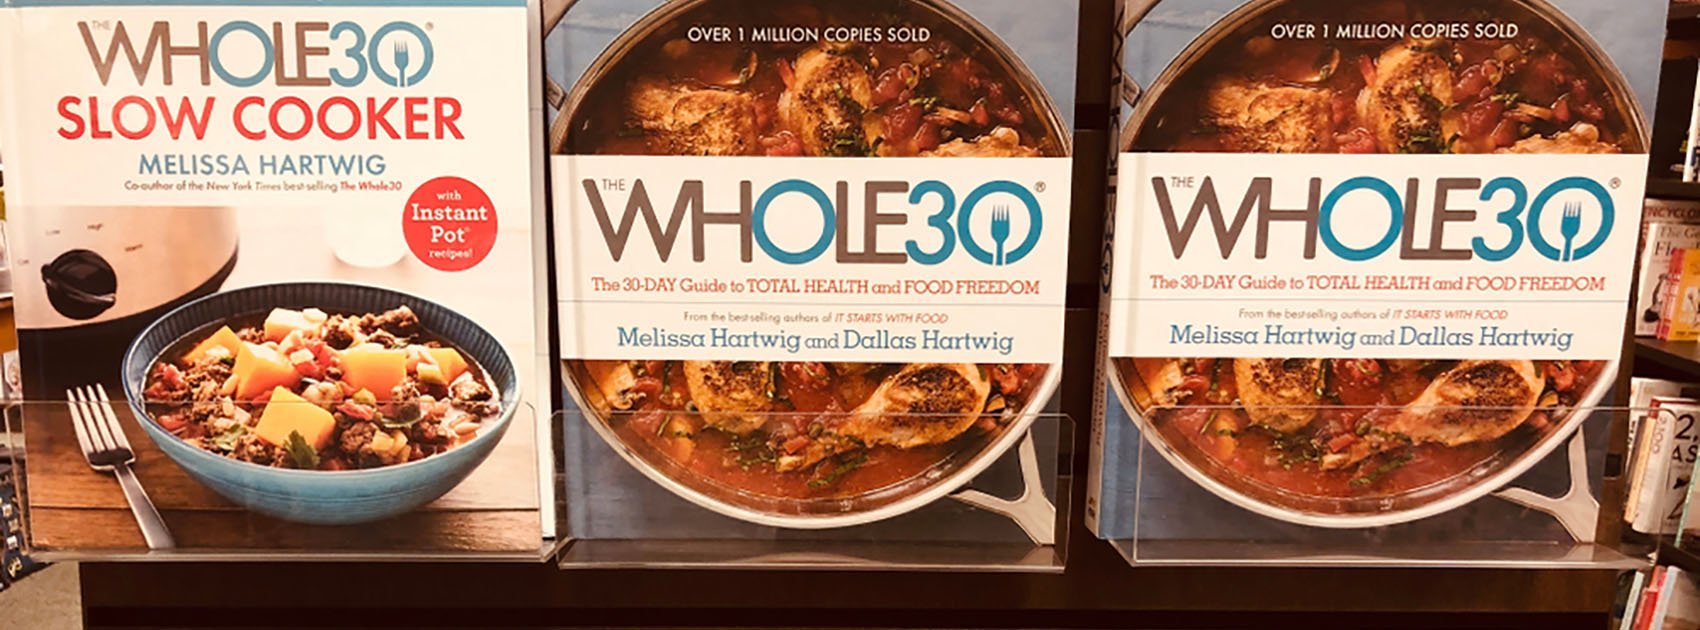 My take on Whole30